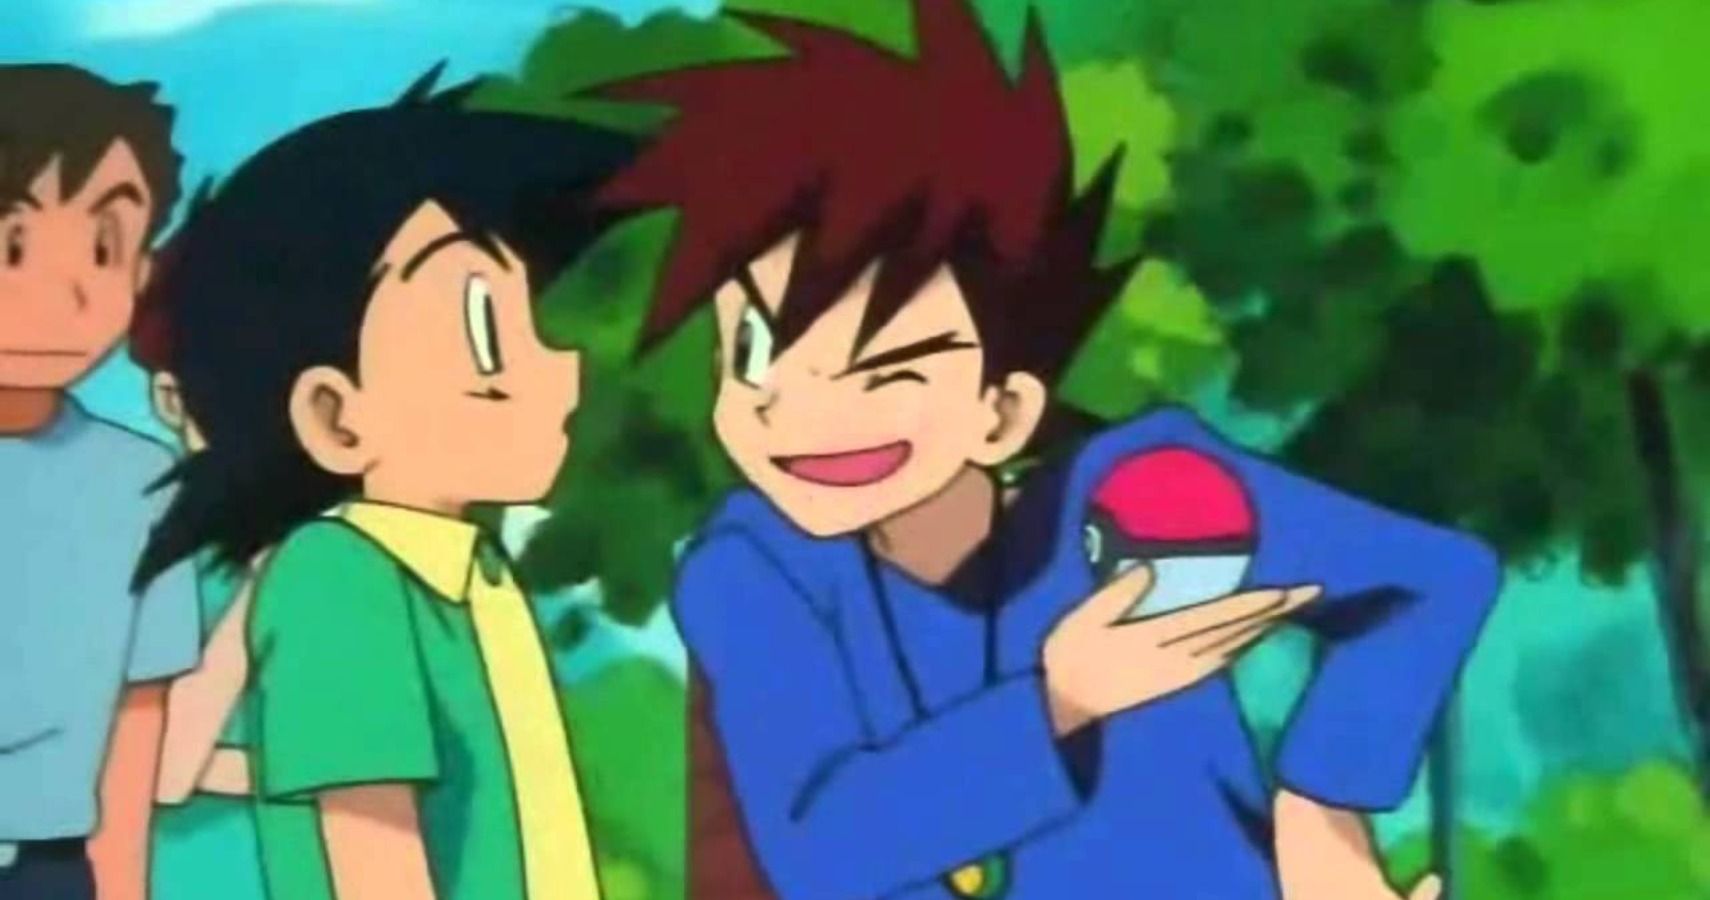 If You Think Gary Oak Is Pokemons Best Rival You Havent Been Paying Attention